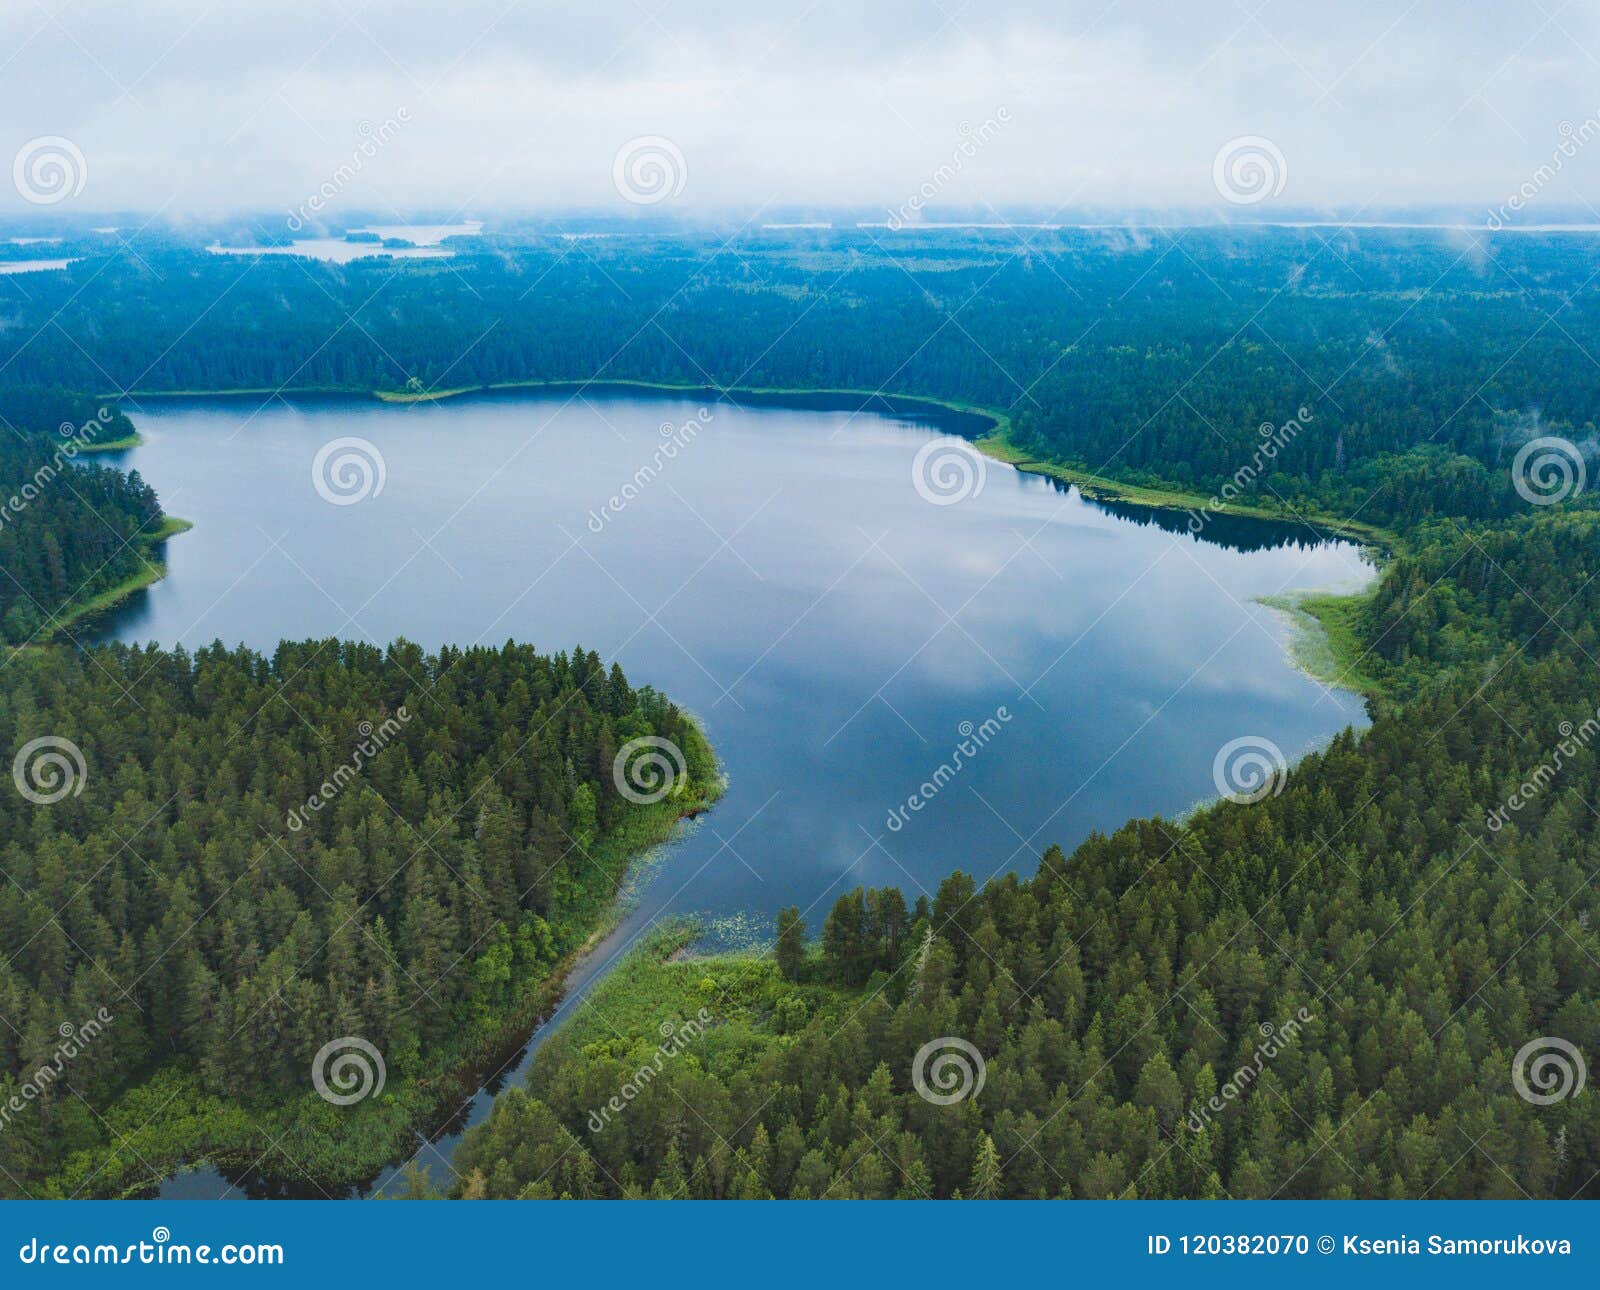 Lake Seliger from Above. Russian Landscape Stock Photo - Image of lake ...